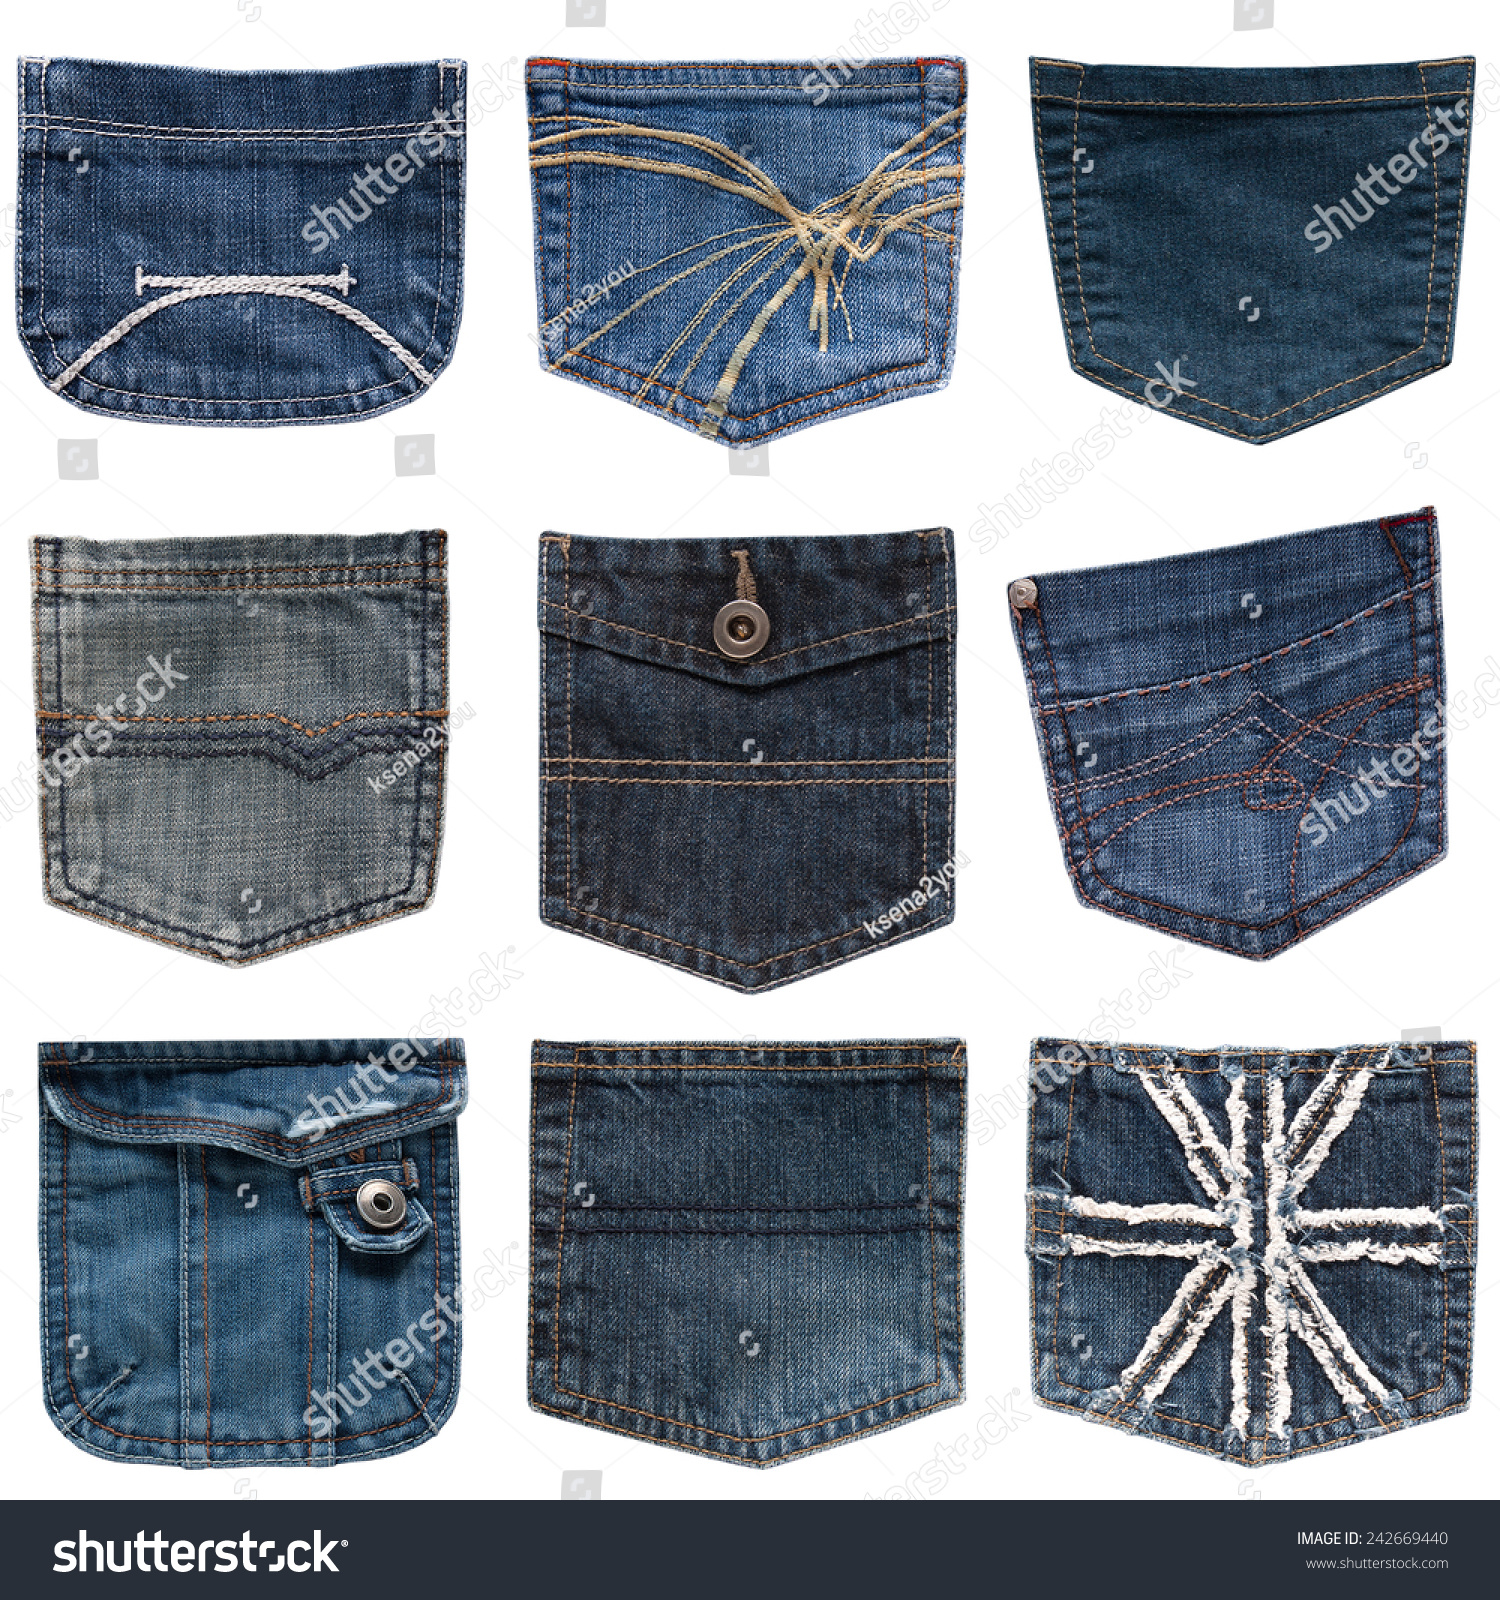 Collection Different Jeans Pocket Stock Photo 242669440 | Shutterstock